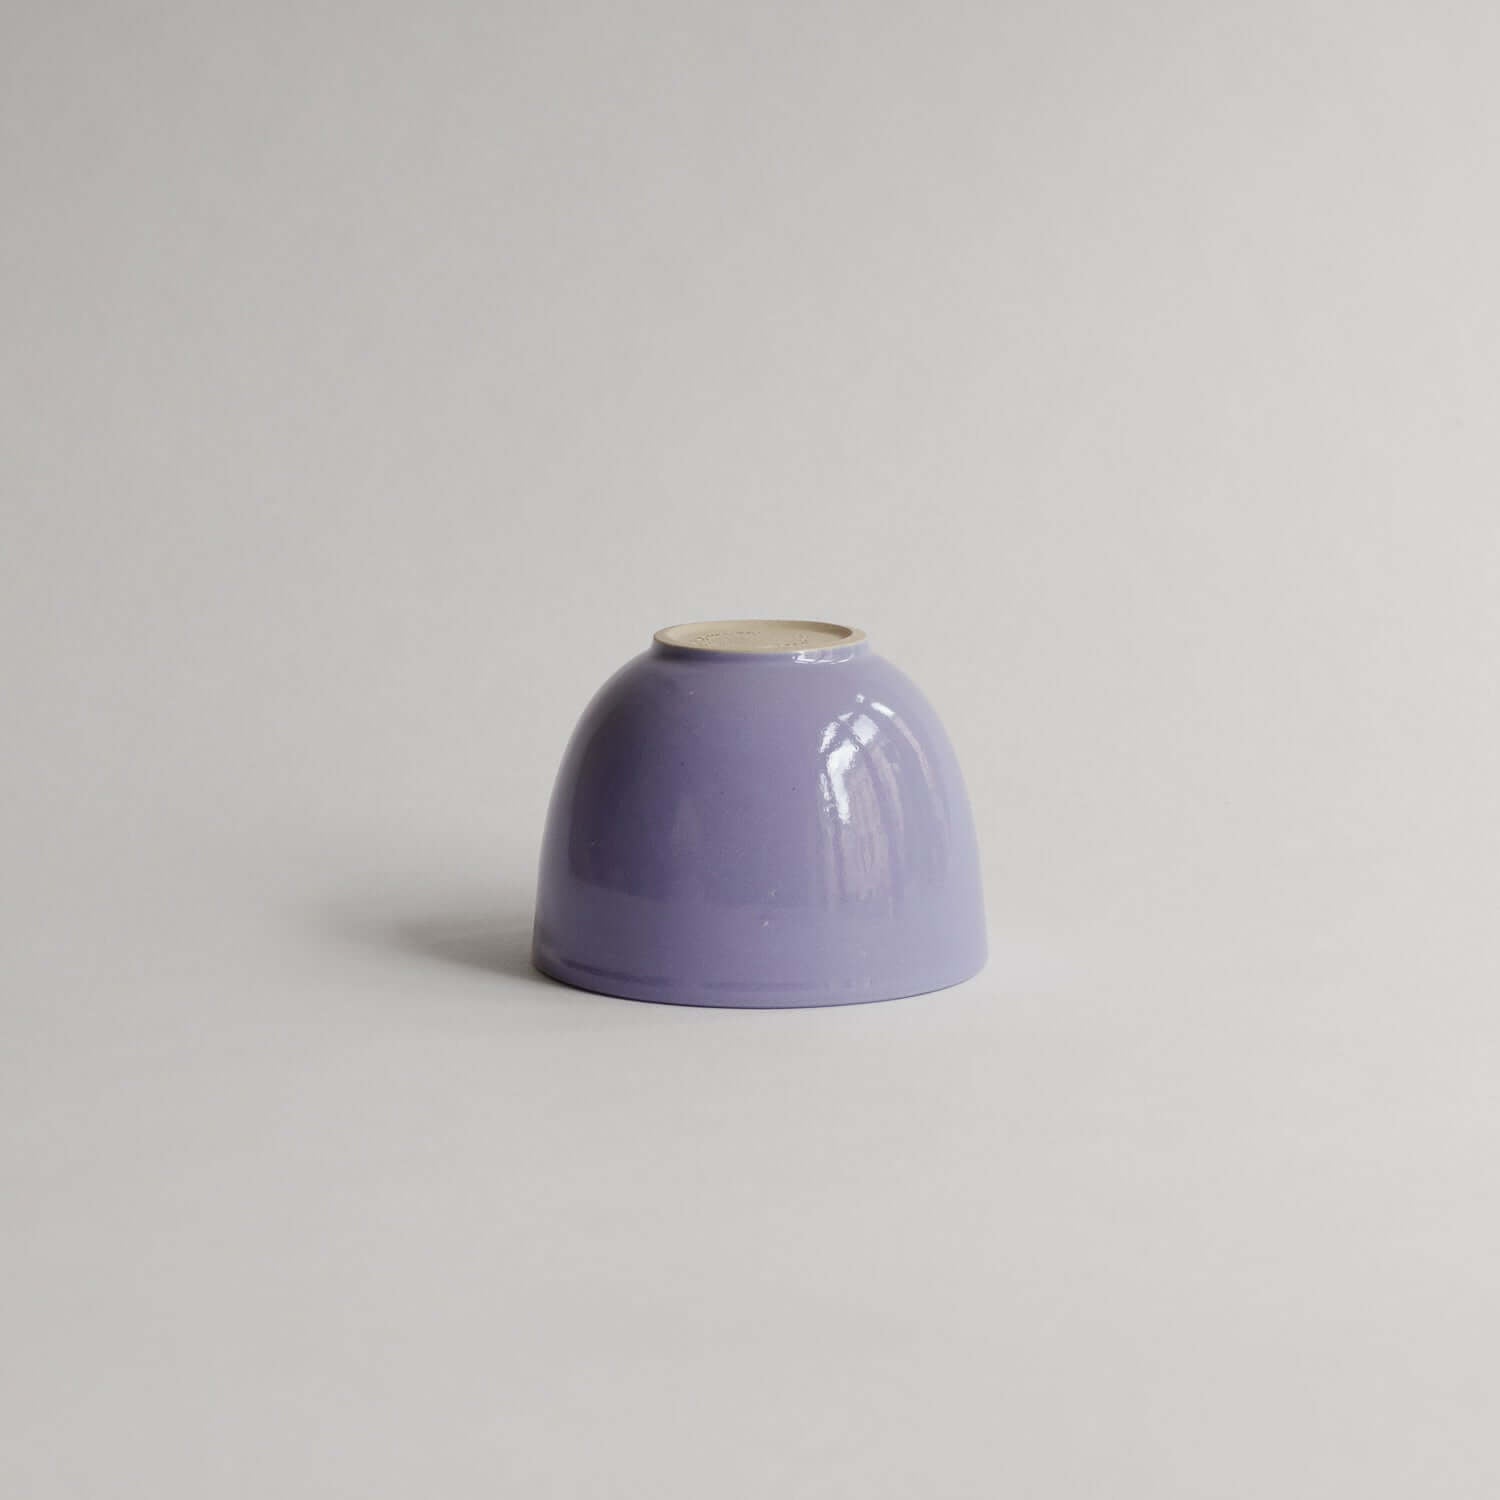 Savor your brew with our Yun lilac coffee cup. Handcrafted, unique lilac glaze on gray stoneware. Perfect for your coffee ritual. von viola beuscher ceramics